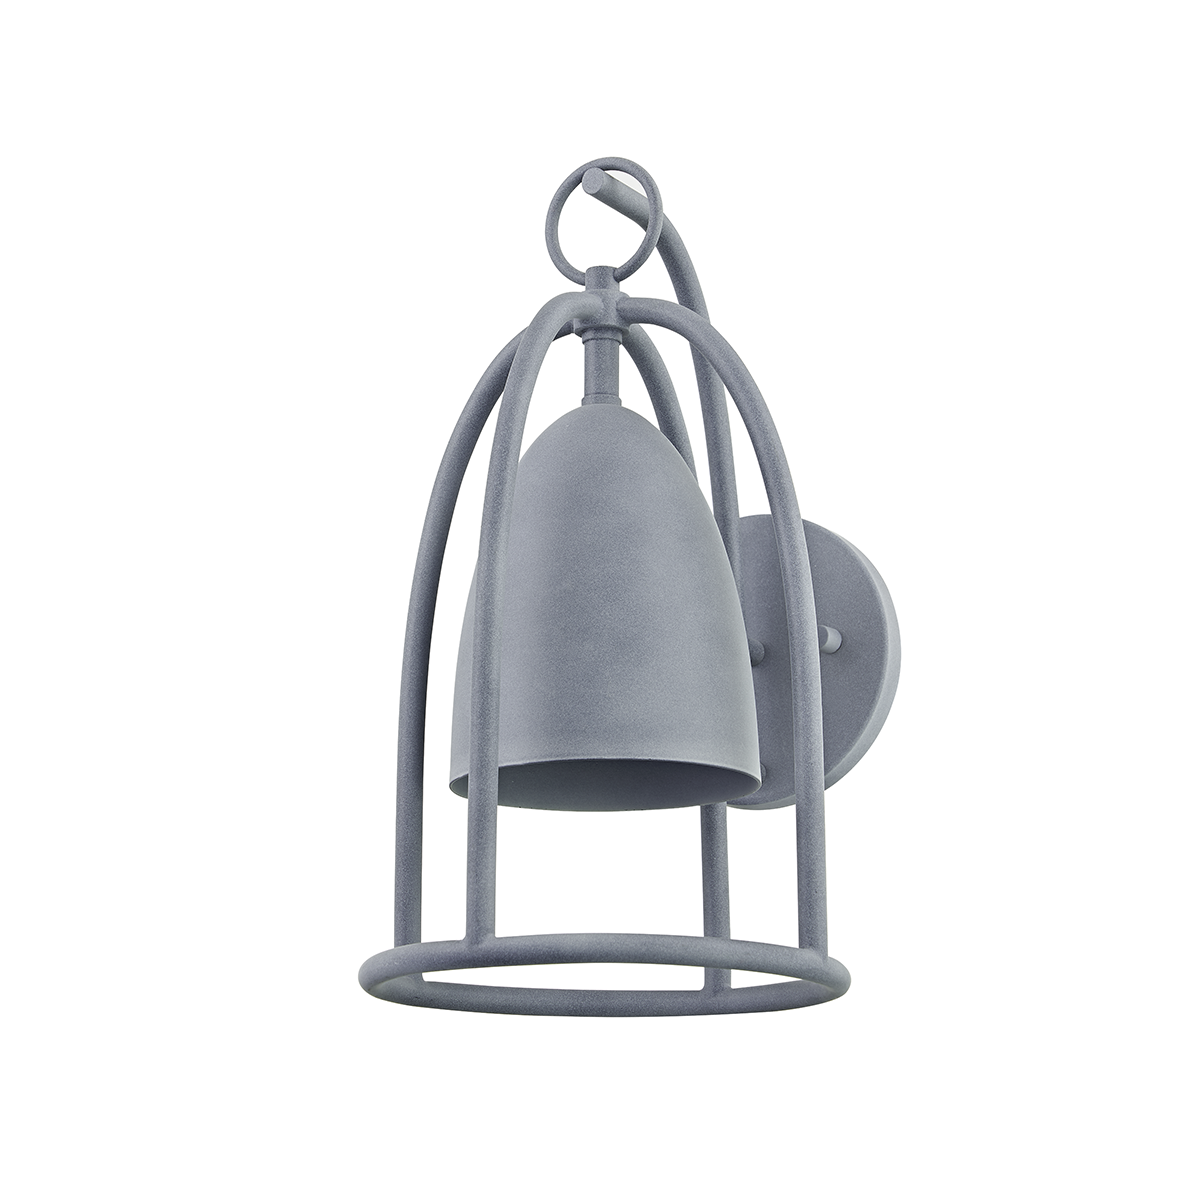 Troy WISTERIA 1 LIGHT EXTERIOR WALL SCONCE B1101 Outdoor l Wall Troy Lighting   